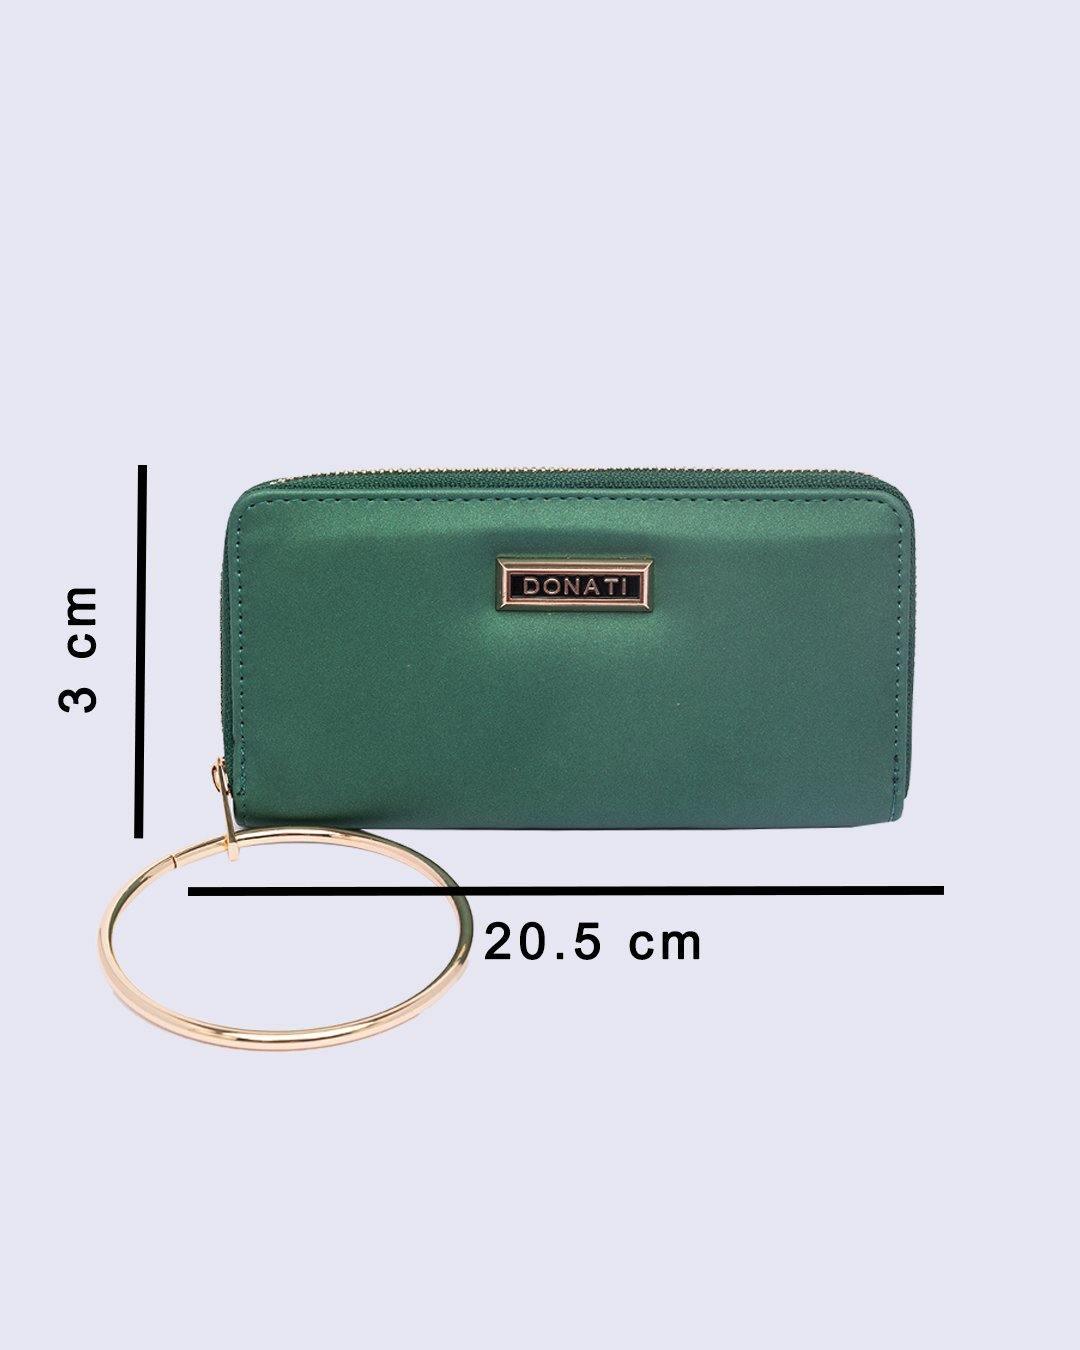 Buy Green Crocodile Pattern Genuine Leather Convertible Bag with Detachable  Shoulder Strap, Leather Handbag, Crossbody Bag, Purse, Leather Bag for Women  at ShopLC.